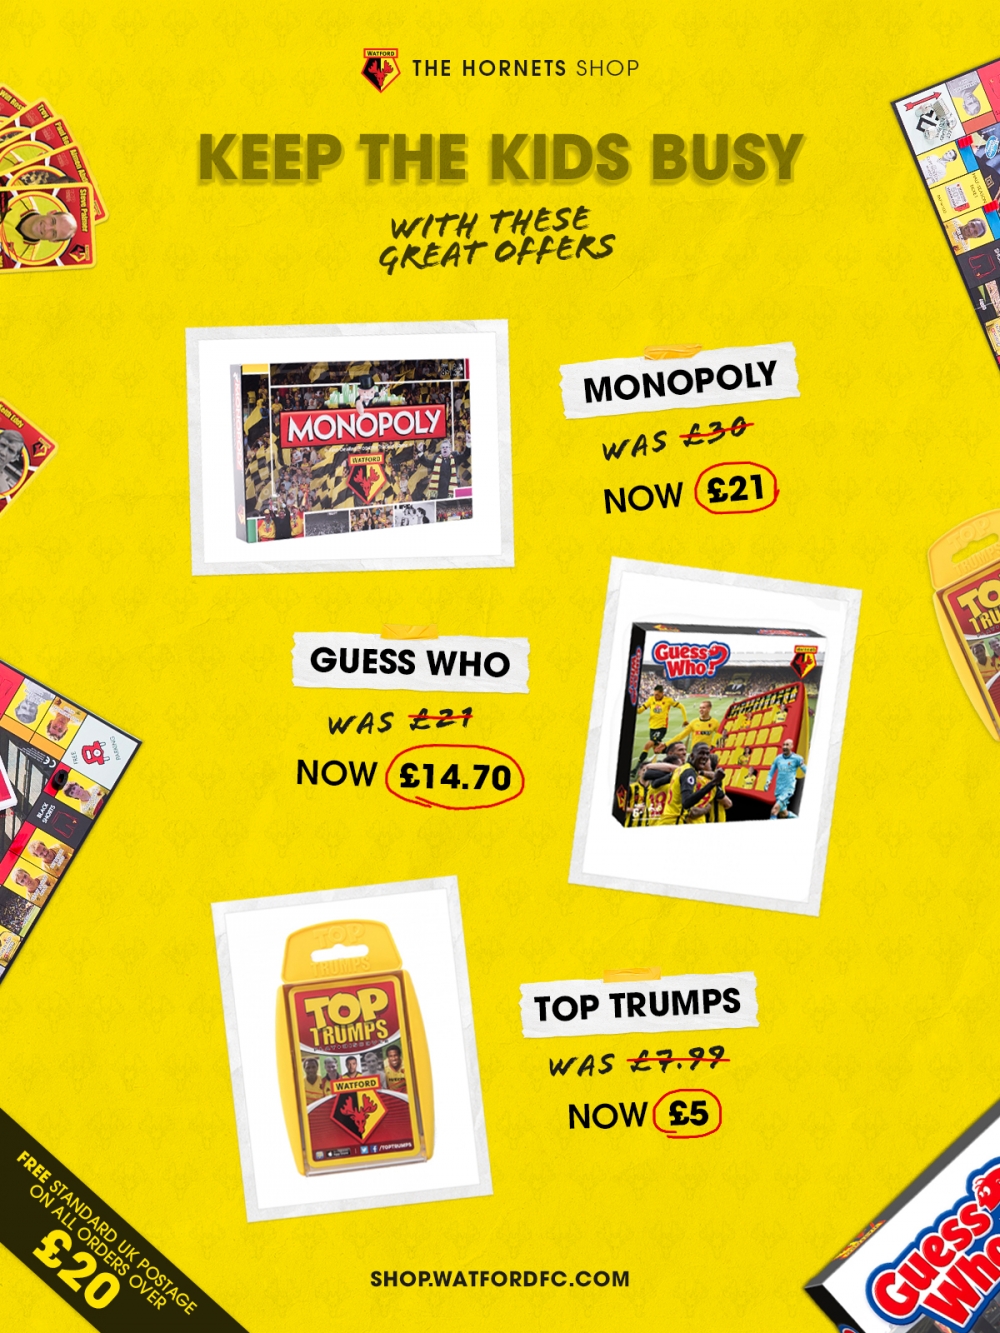 Monopoly, Guess Who & Top Trumps All Available For A Reduced Price!